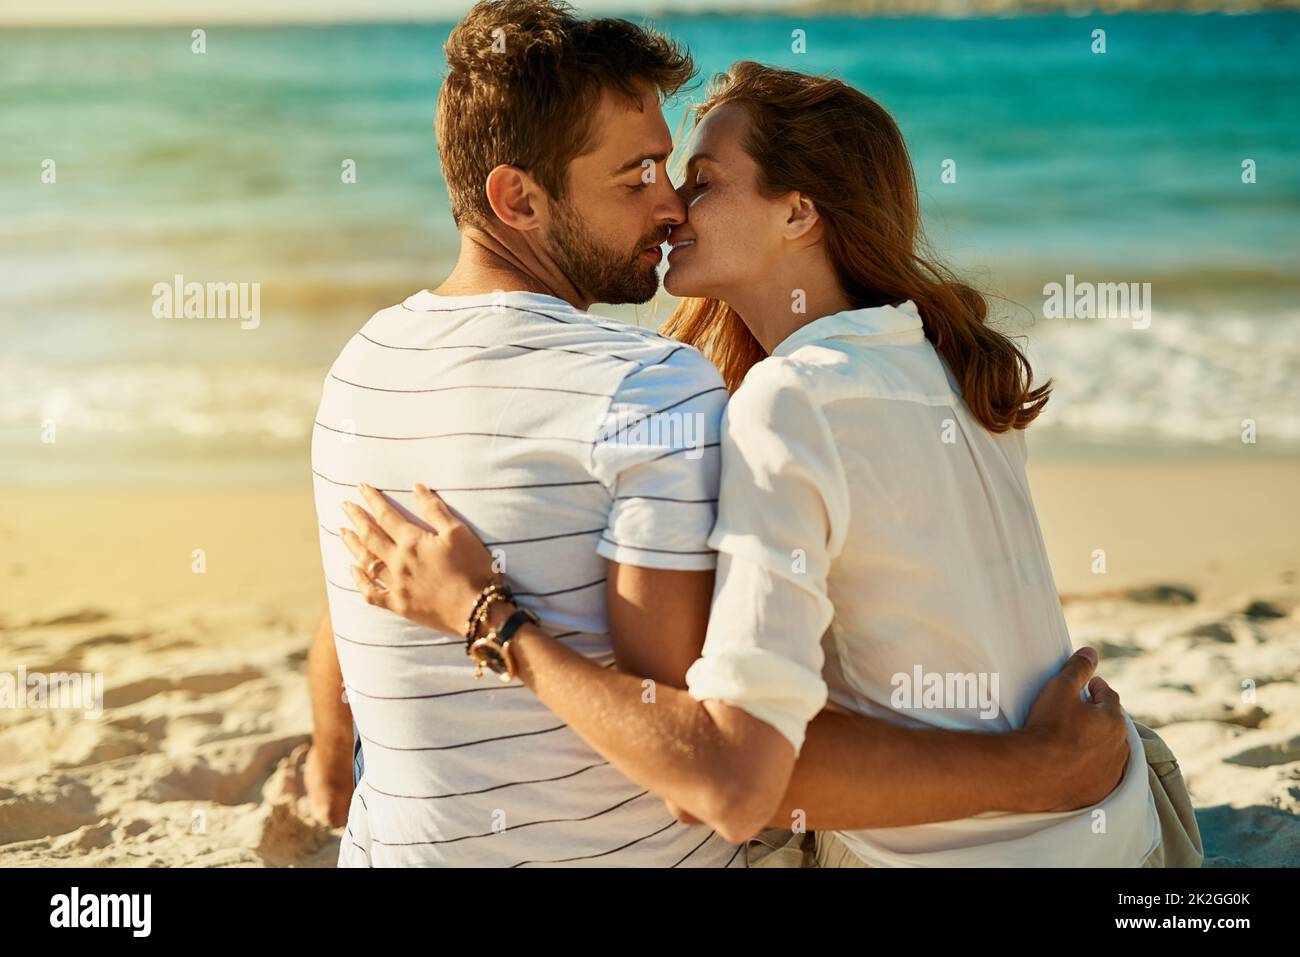 Summer romance doesnt get any better than this. Shot of a young couple kissing on a summers day at the beach. Stock Photo